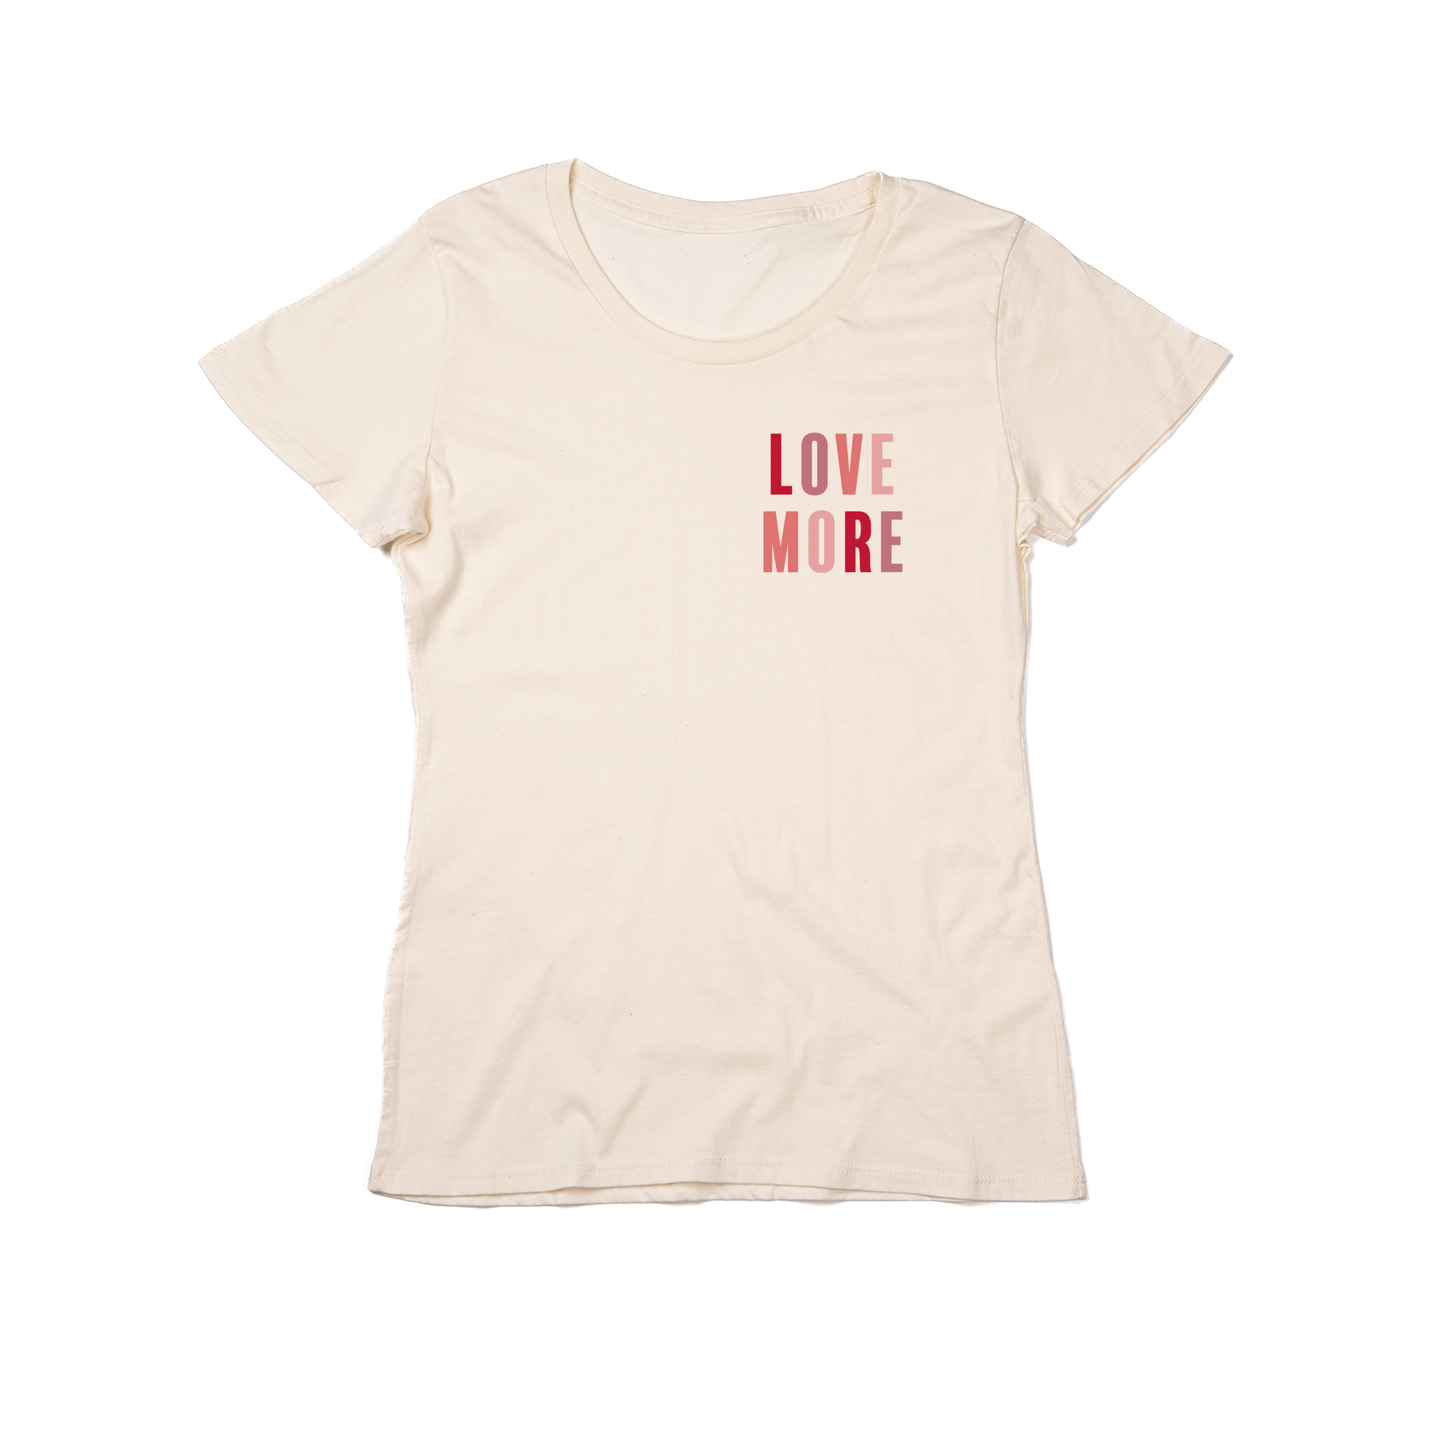 Love More (Pocket) - Women's Fitted Tee (Natural)